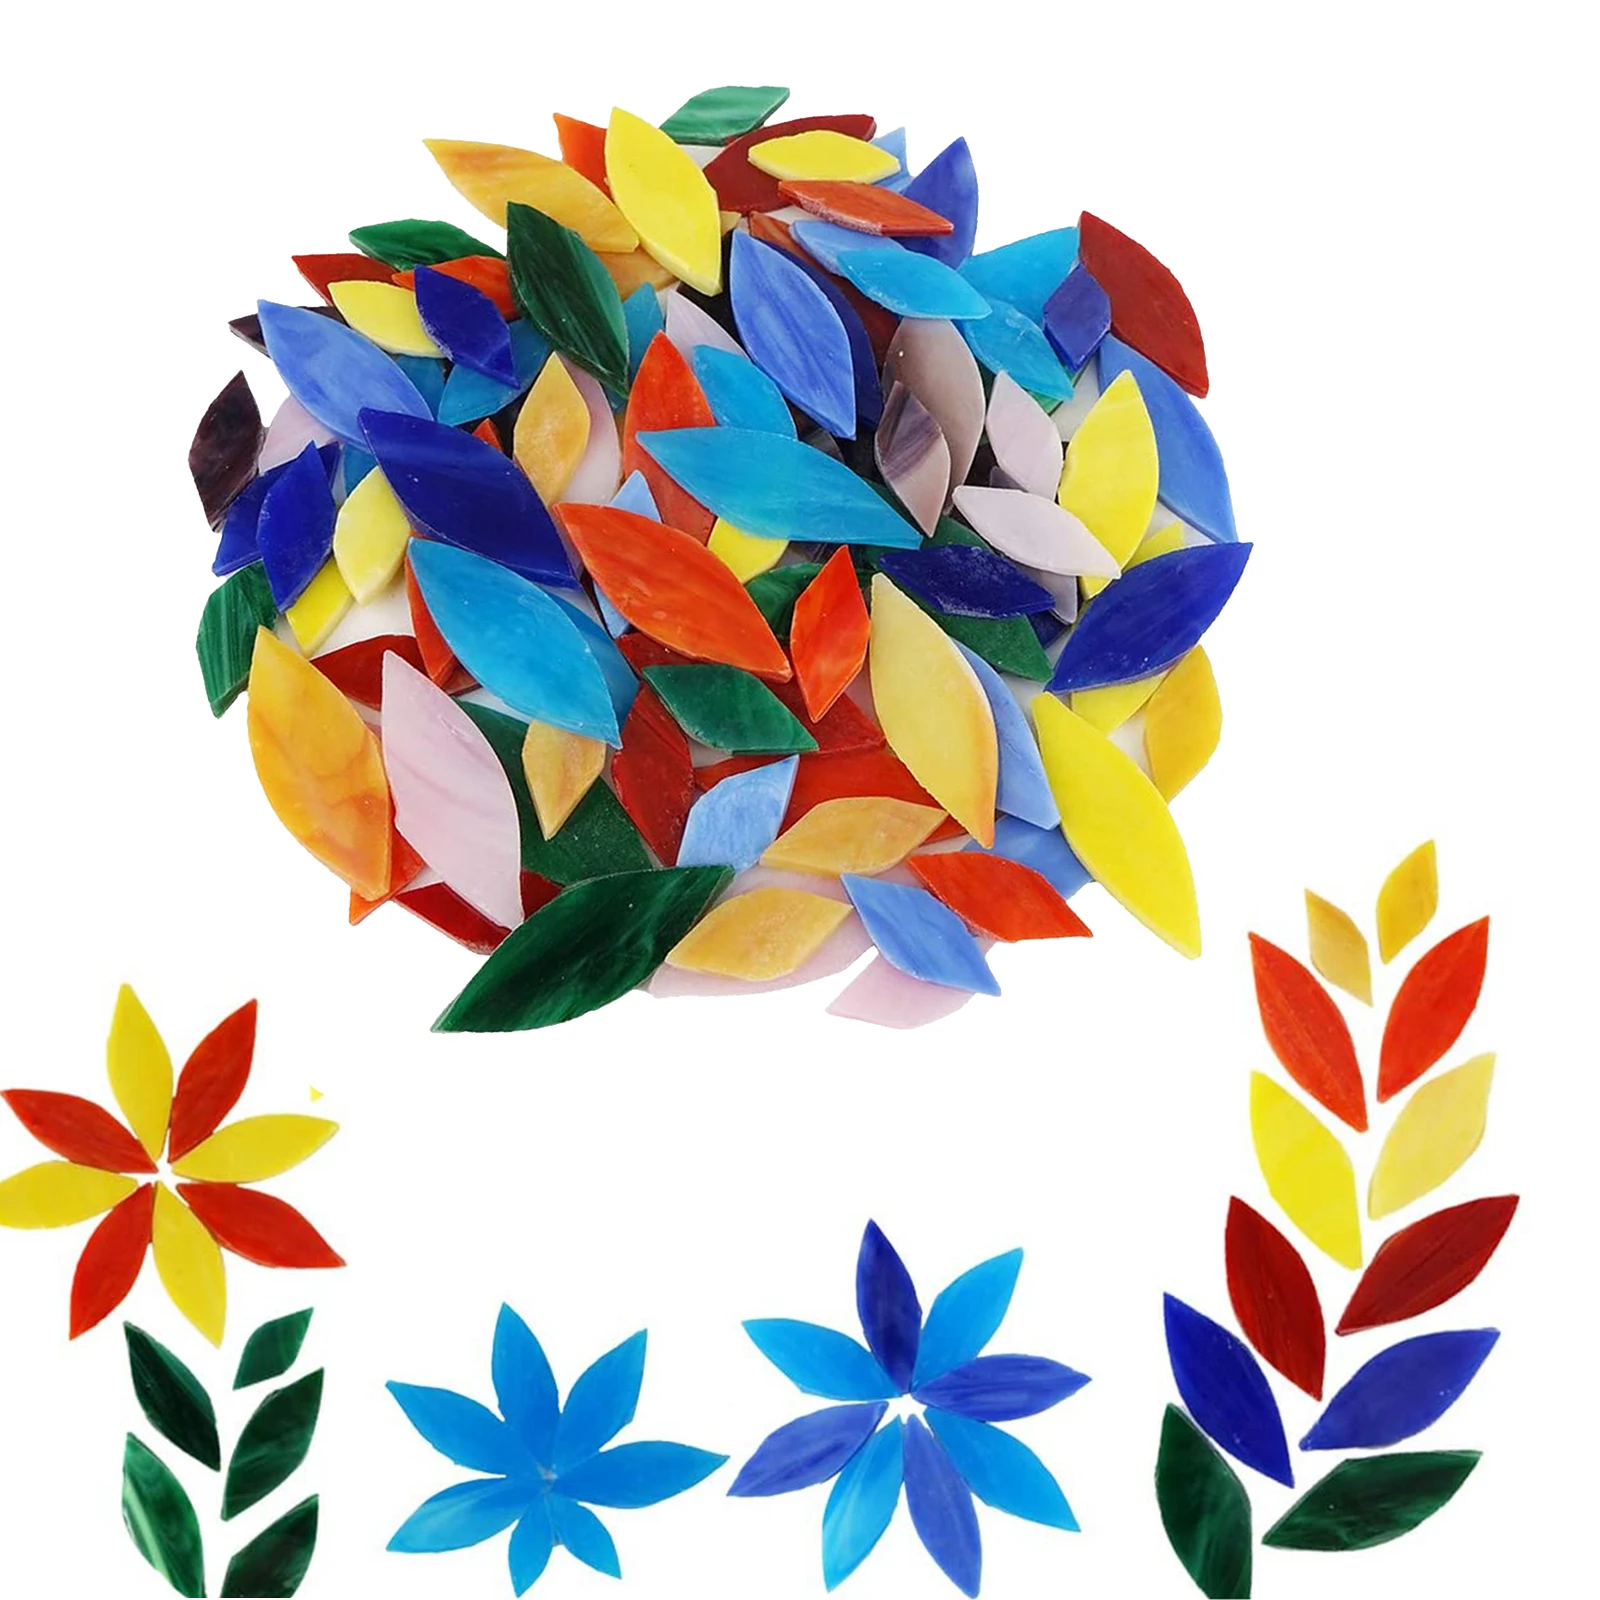 100 Pcs Assorted Colors Mosaic Tiles Hand-Cut Stained Glass for Art Pots